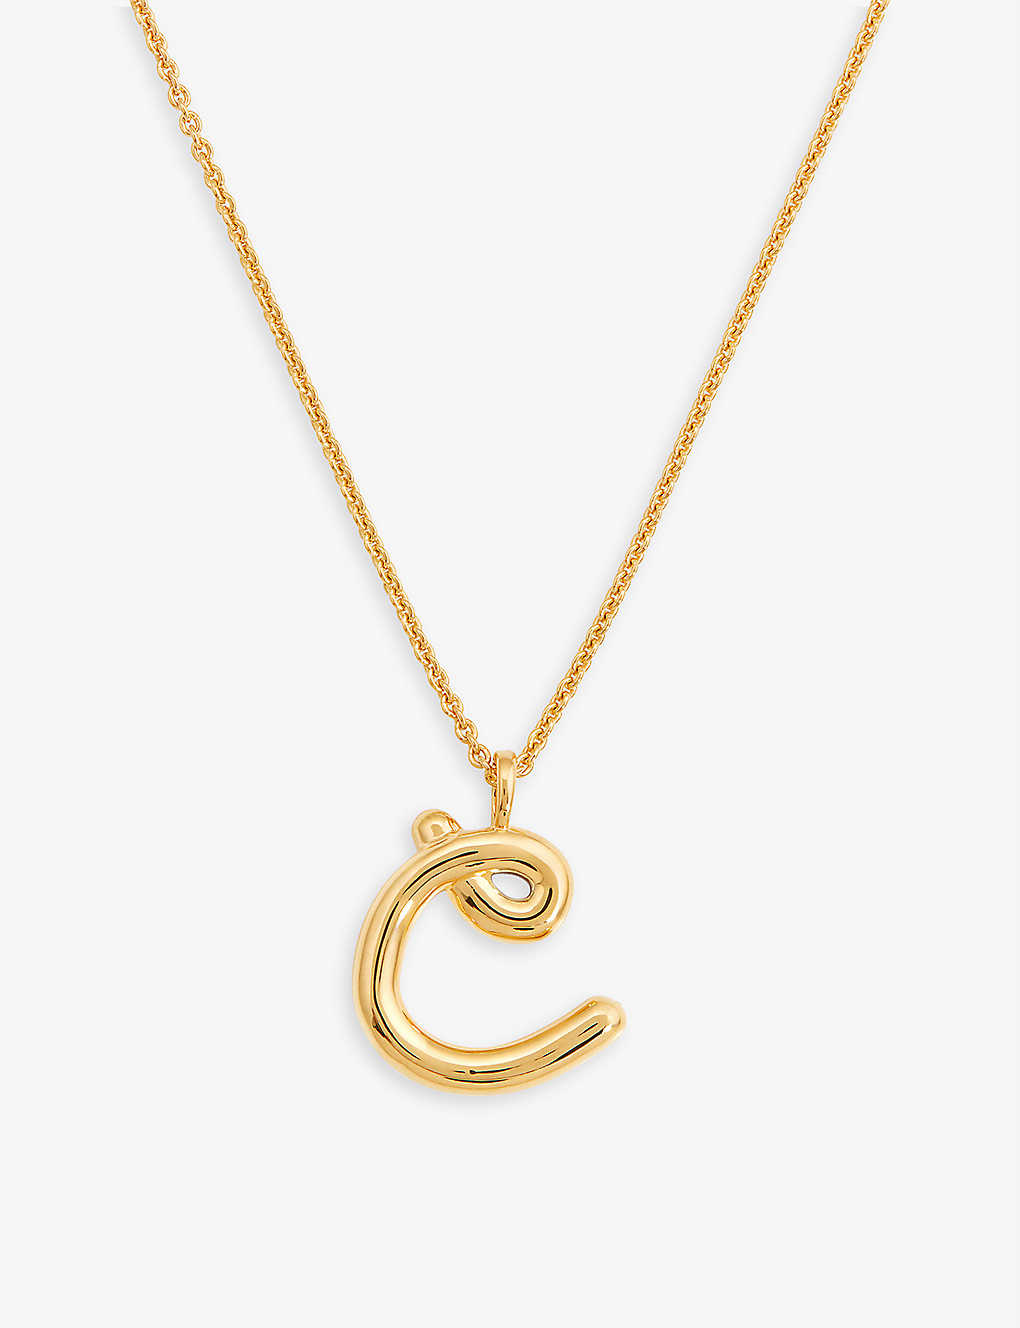 Missoma Curly Initial Pendant 18ct Yellow Gold-plated Vermeil Recycled Sterling-silver Pendant Necklace